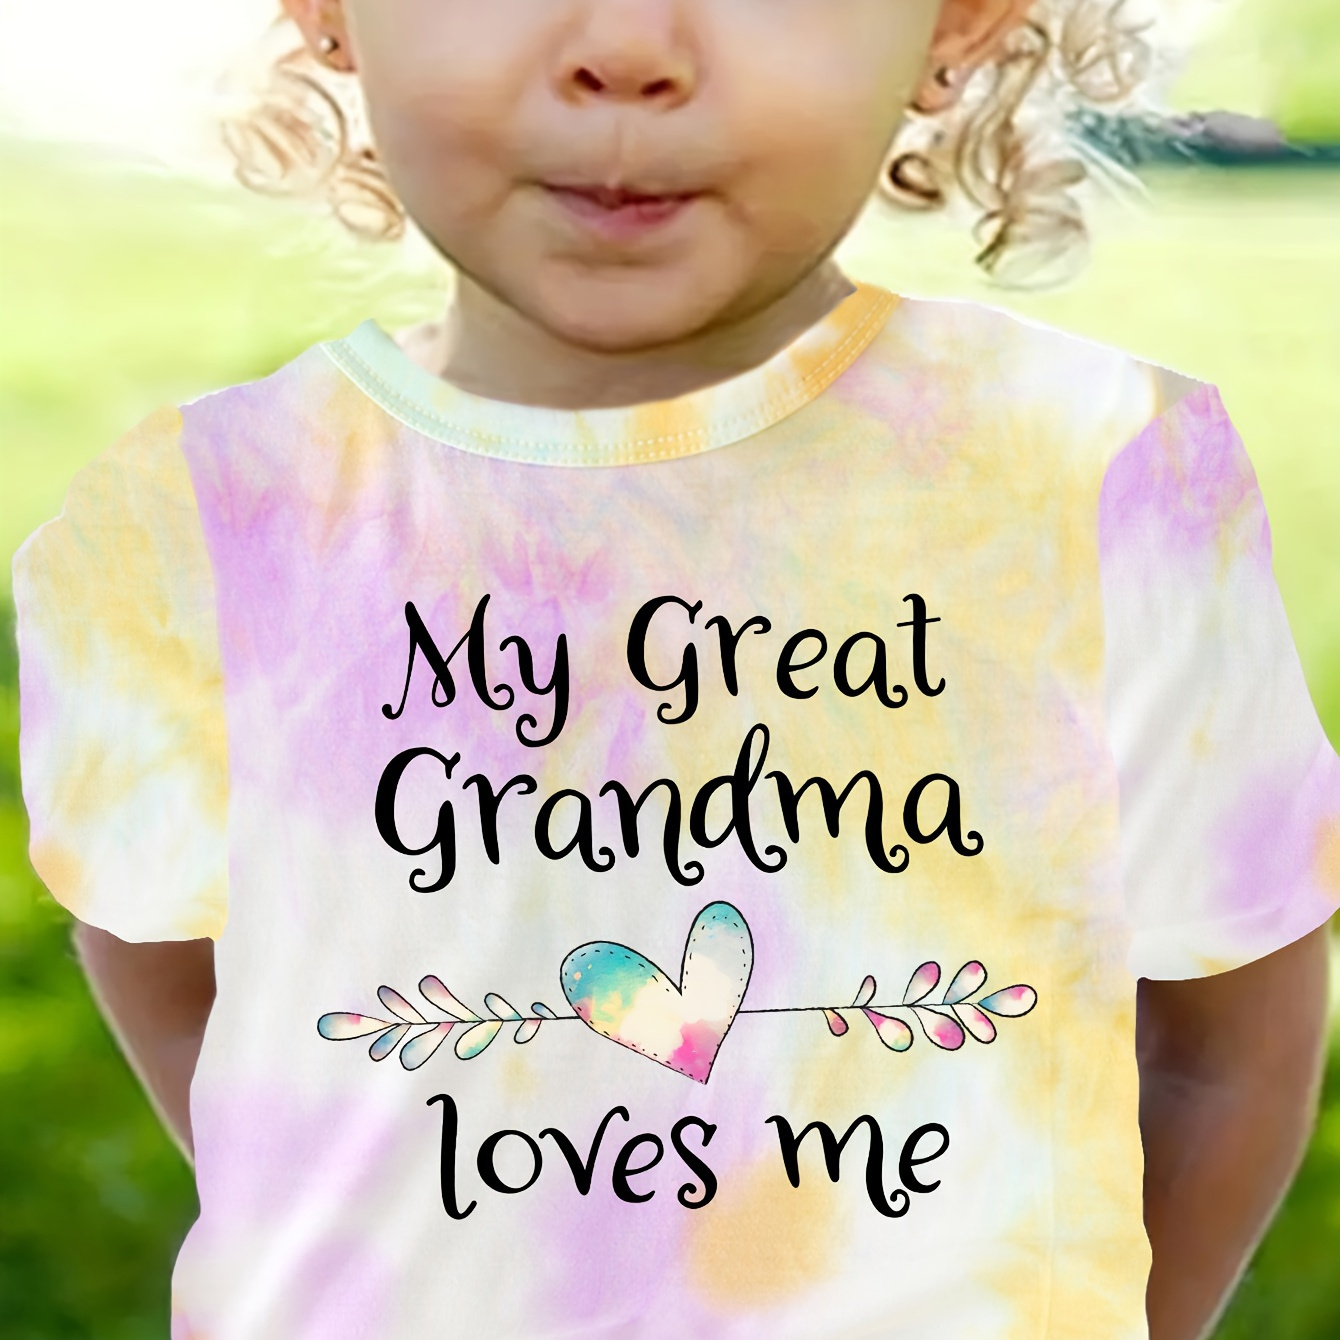 

Tie-dye Summer T-shirt With "my Great Grandma Loves Me" Print, Casual Round Neck Short Sleeve Tee Shirt, Creative Graphic Design